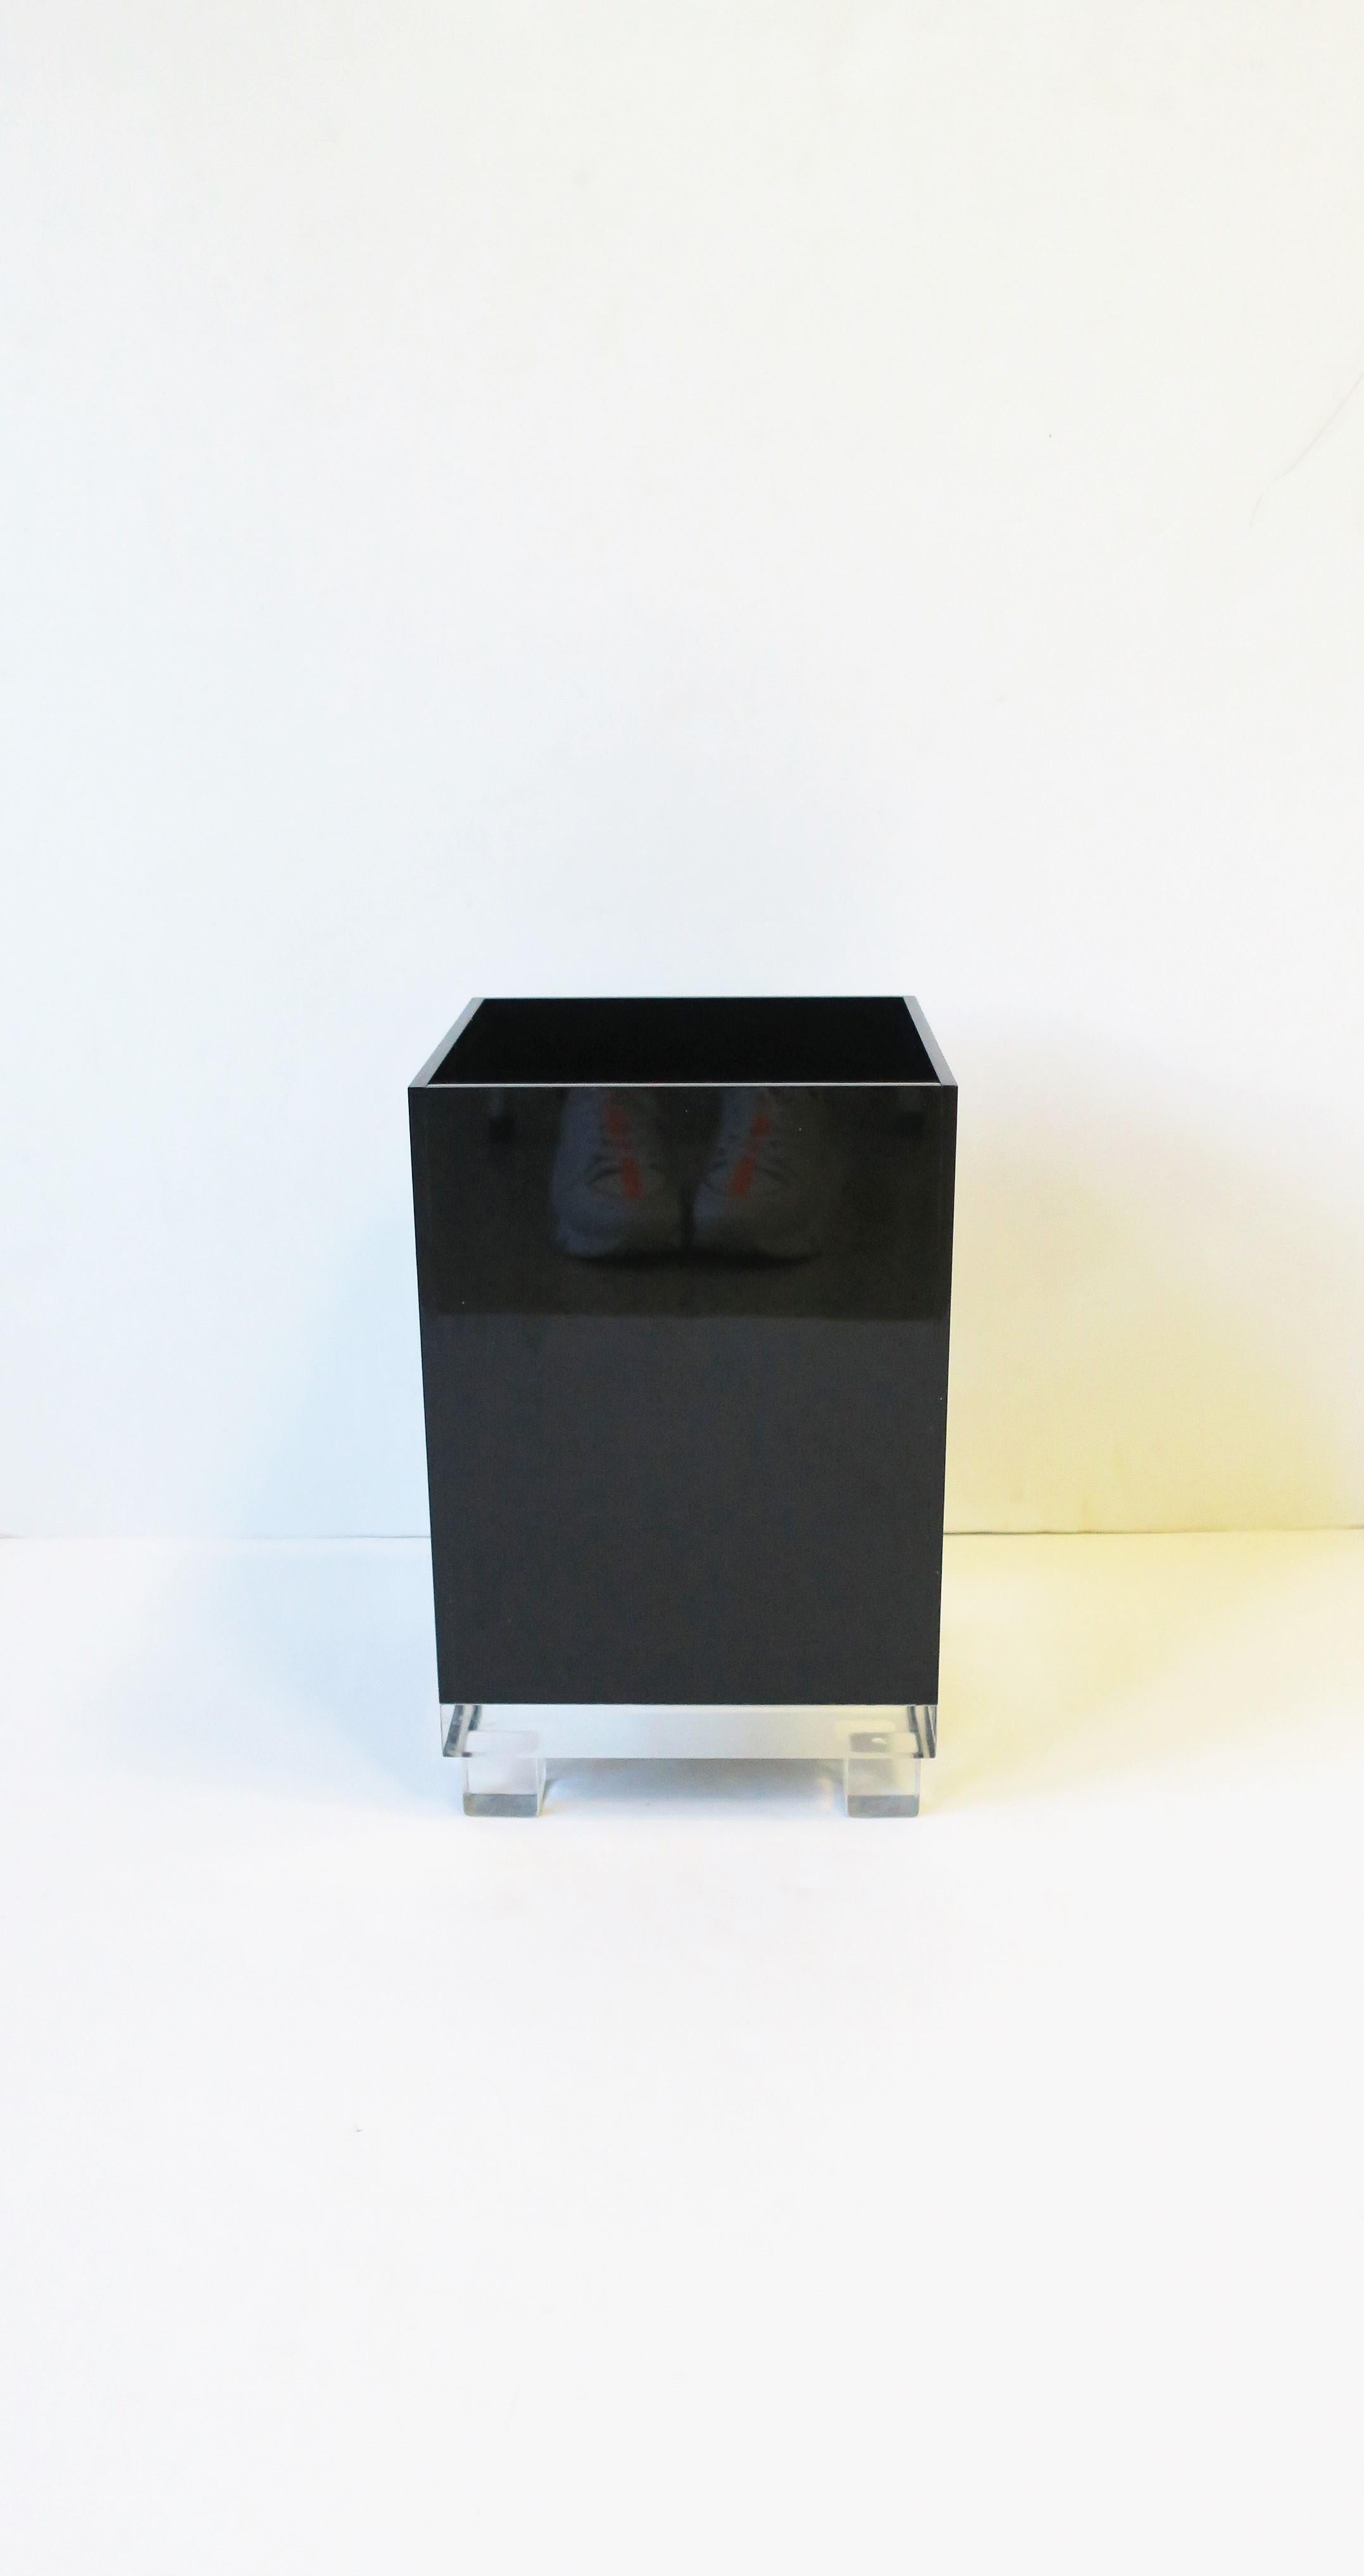 American Black Acrylic and Lucite Wastebasket Trash Can